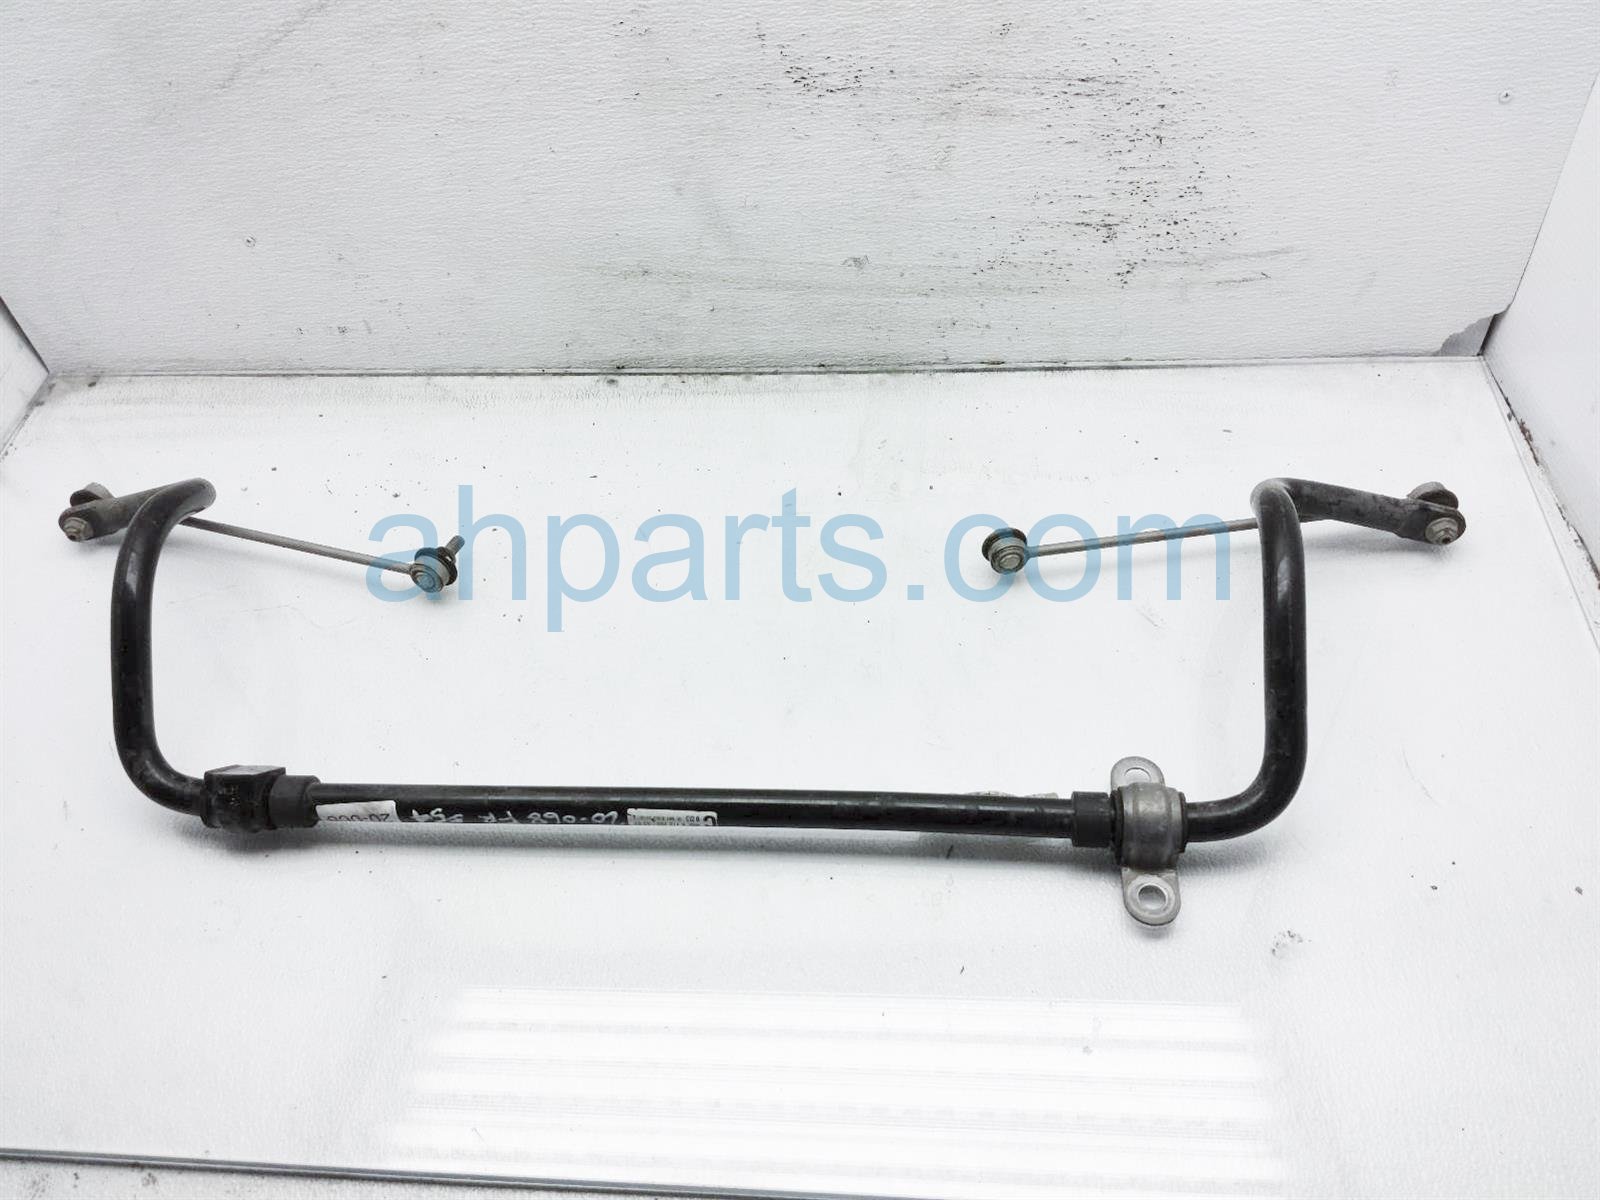 $50 BMW FRONT SWAY BAR W/LINKS - NOTES